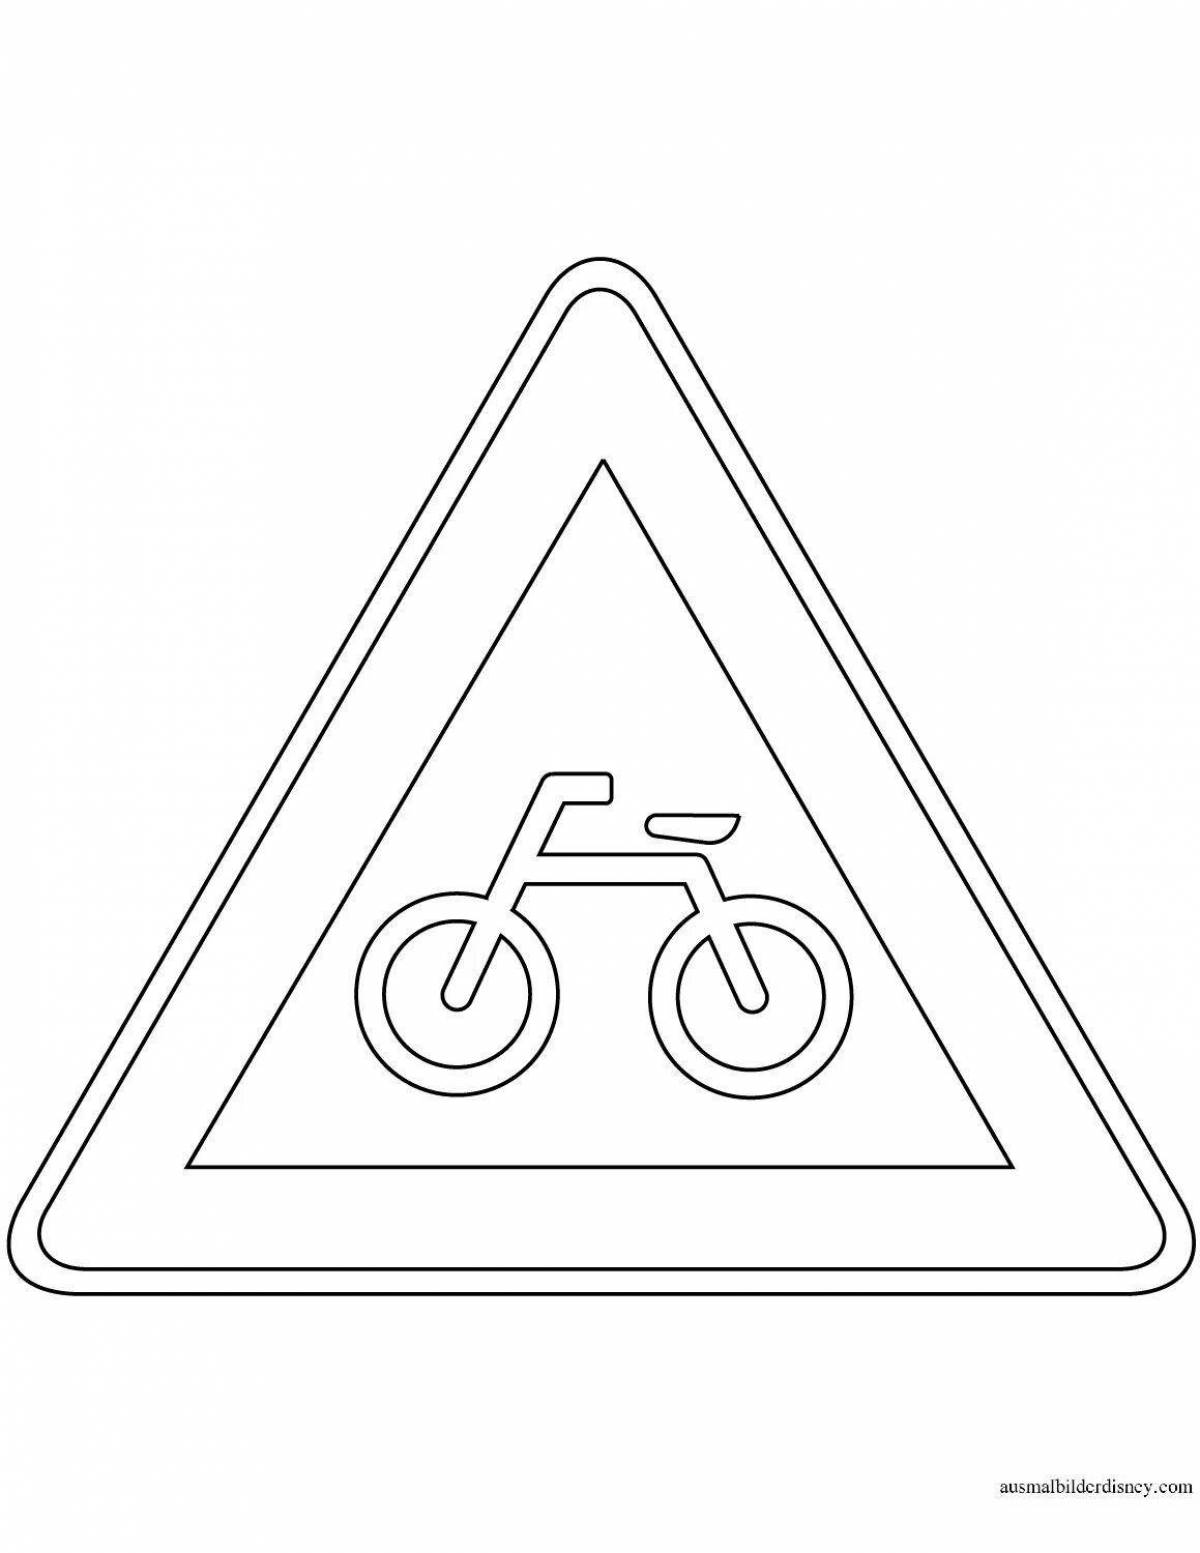 Coloring page shiny bike path road sign